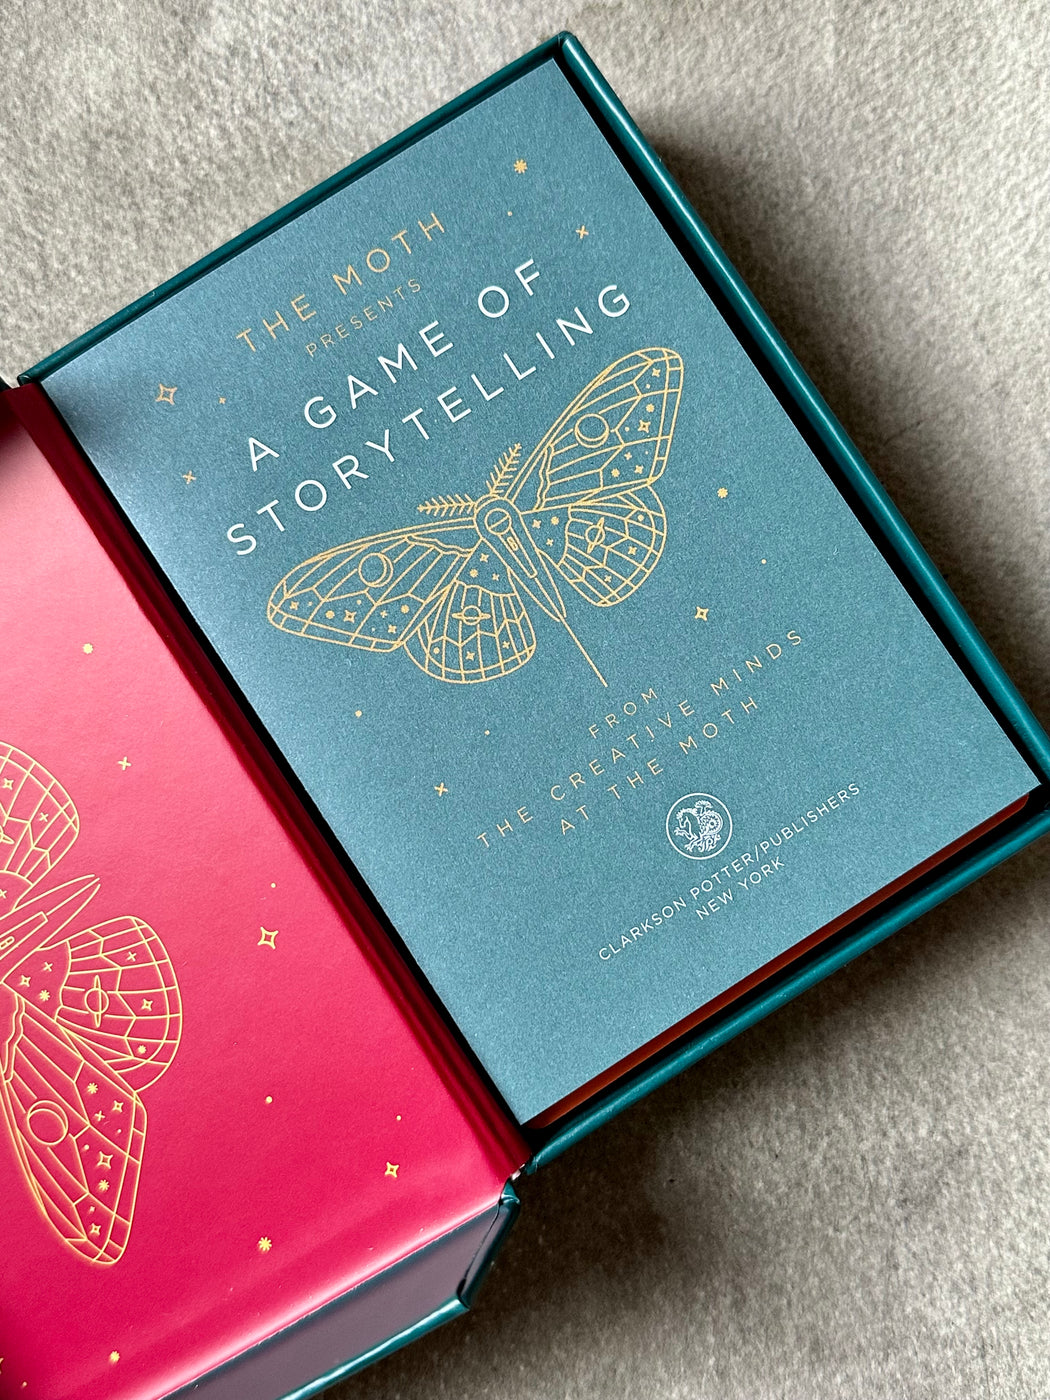 "The Moth Presents: A Game of Storytelling"